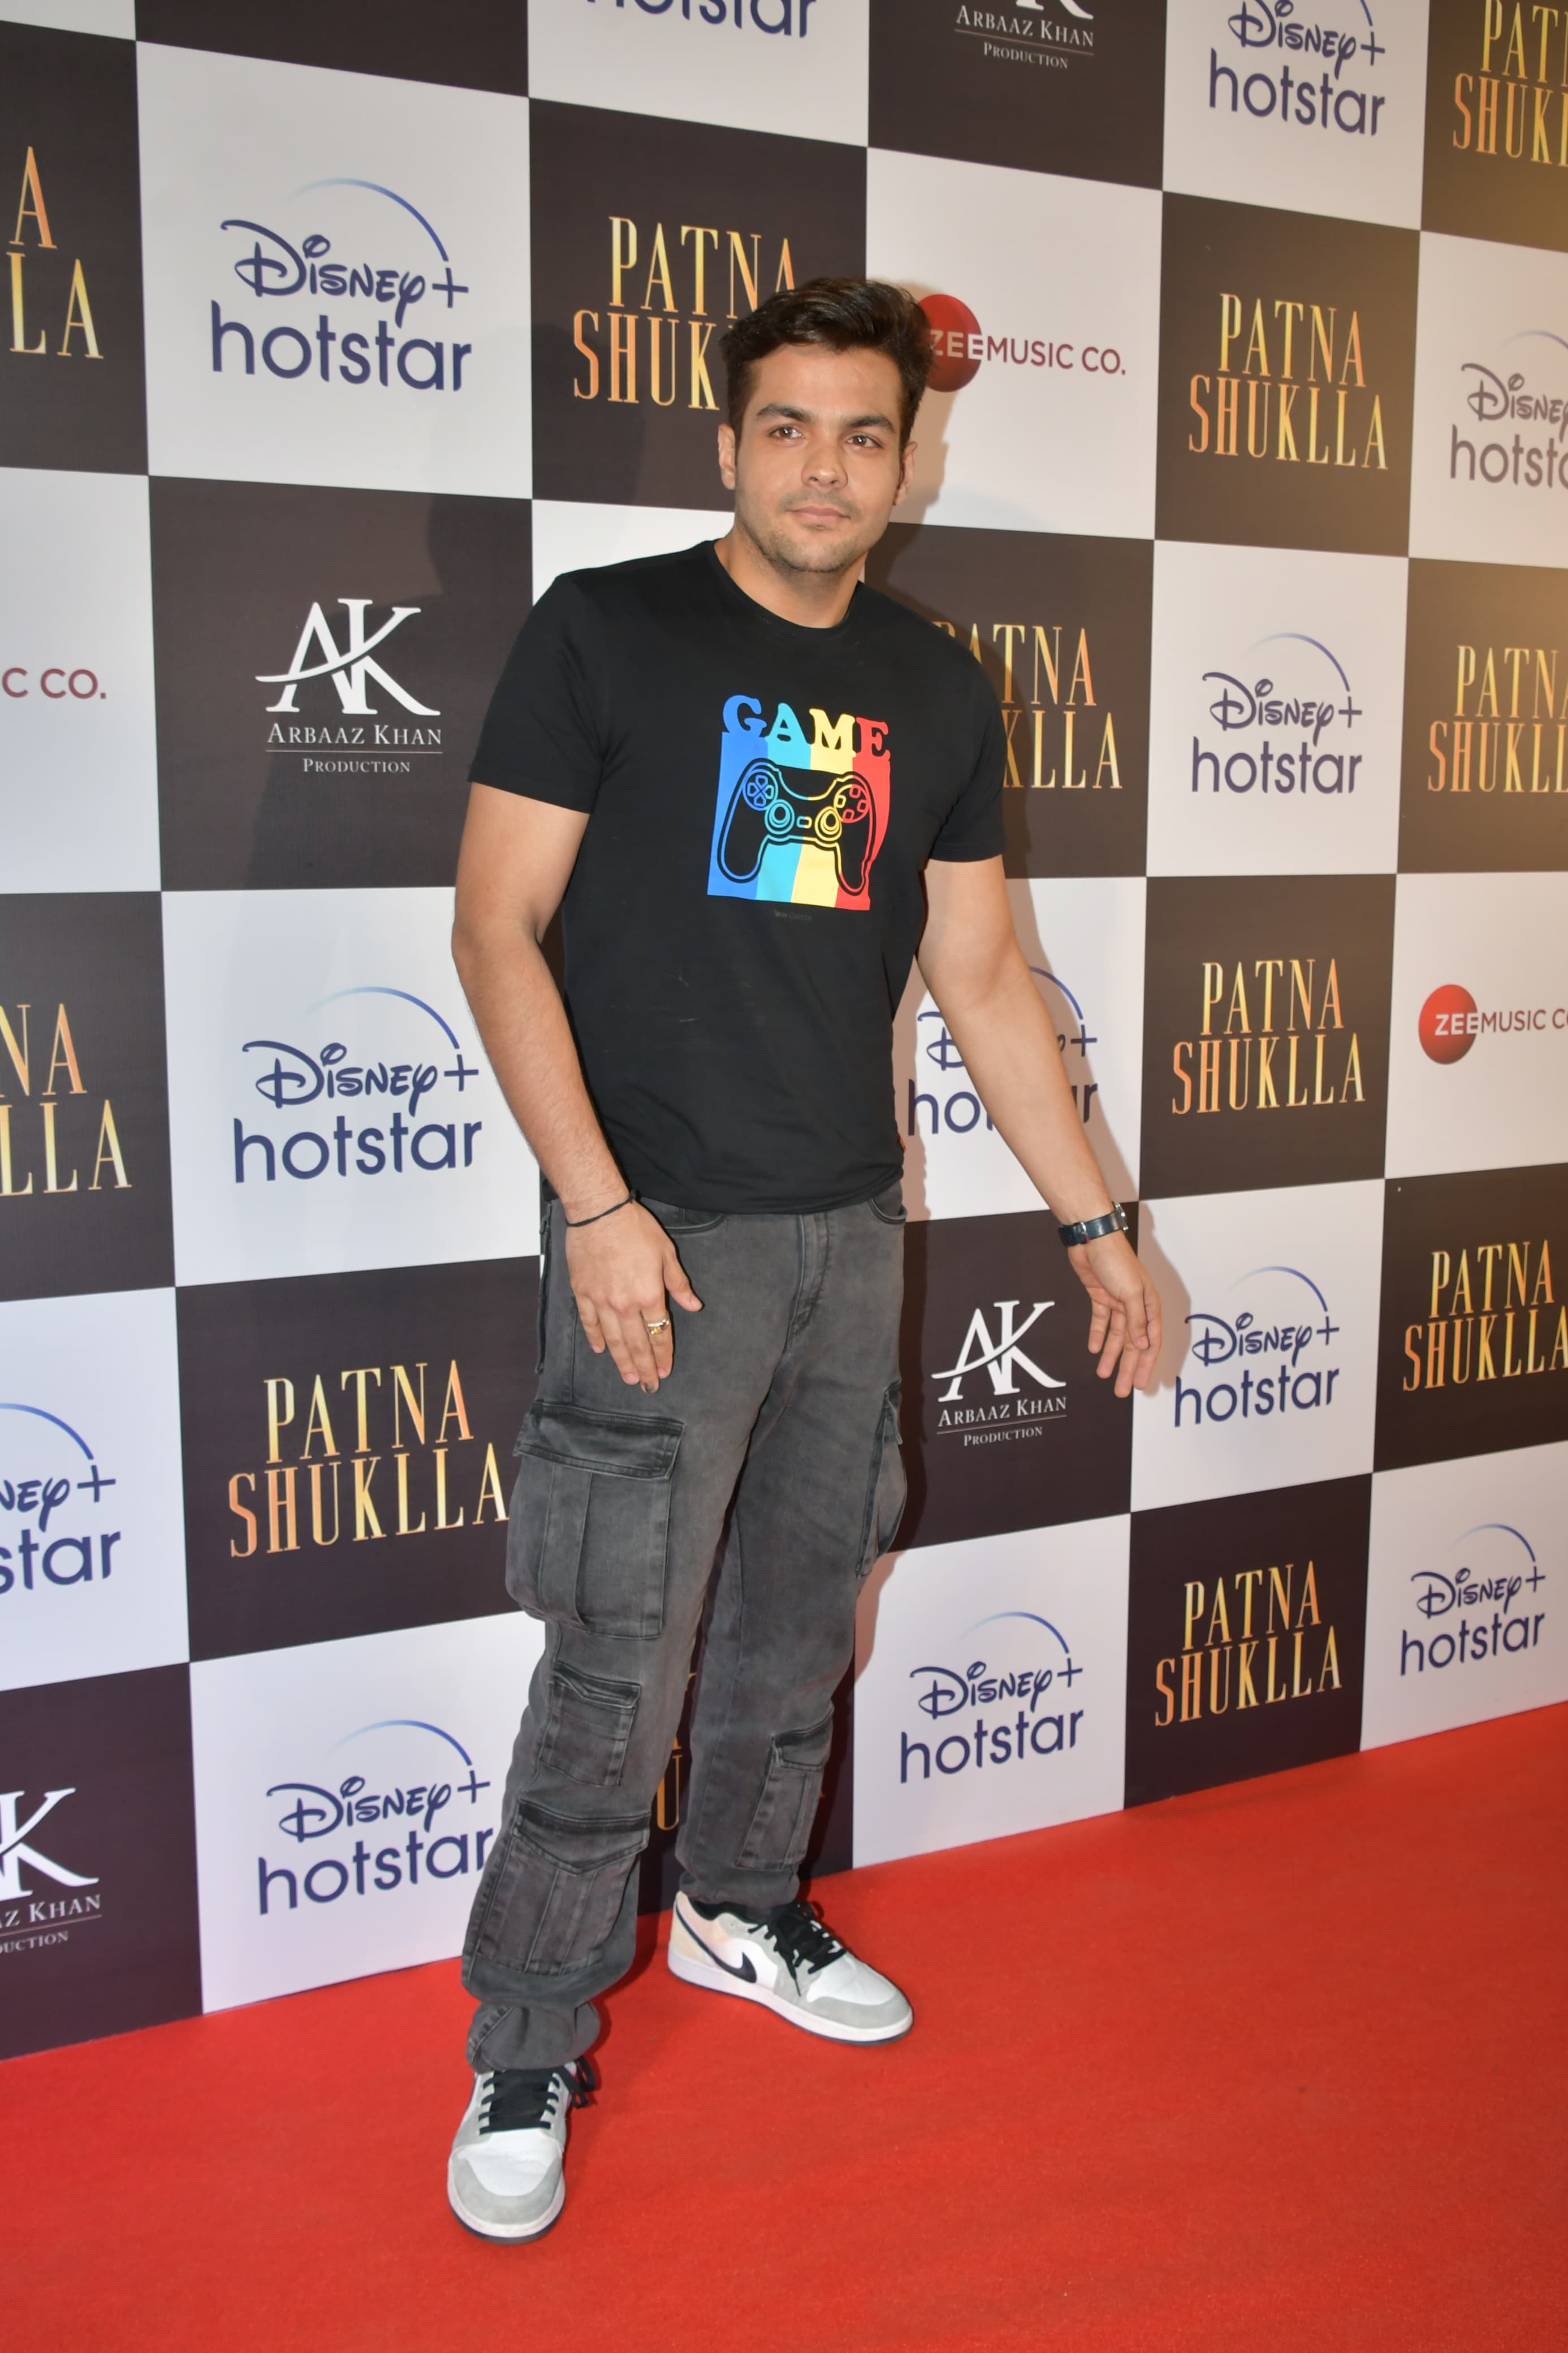 Influencer and Youtuber, Ashish Chanchlani also attended the screening of Patna Shukla